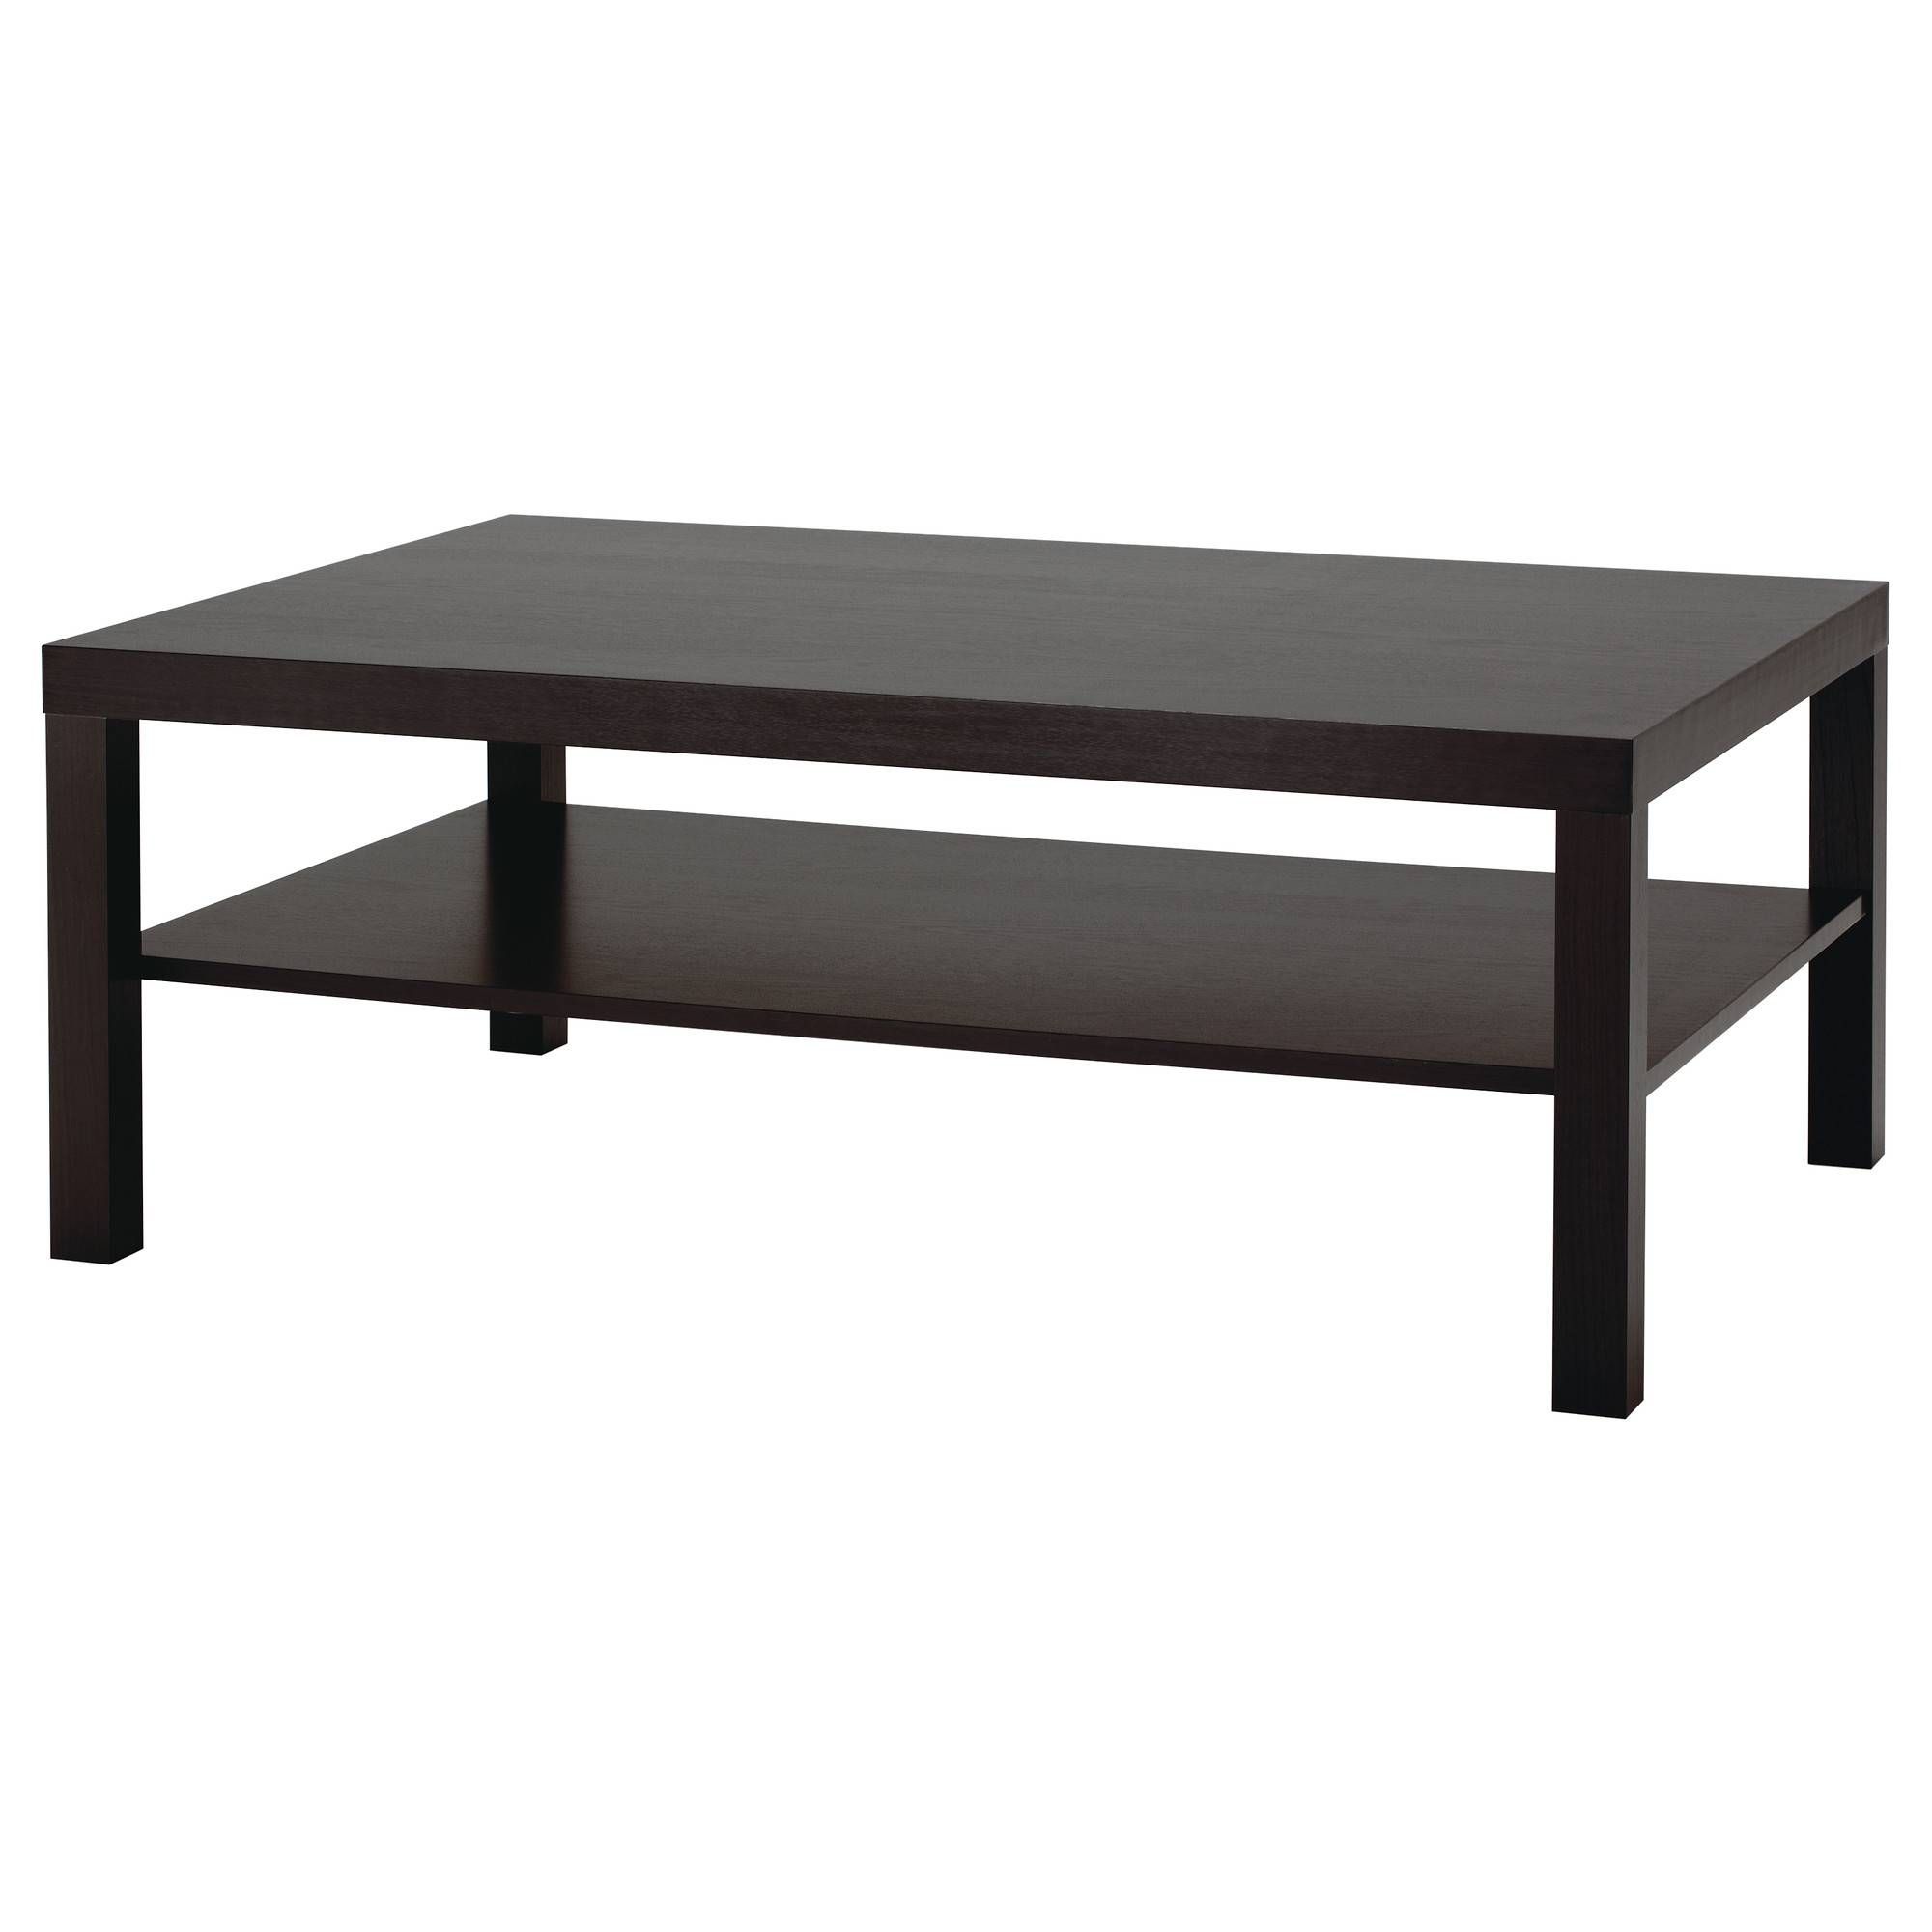 Lack Coffee Table – Black Brown – Ikea Throughout Large Rectangular Coffee Tables (View 7 of 30)